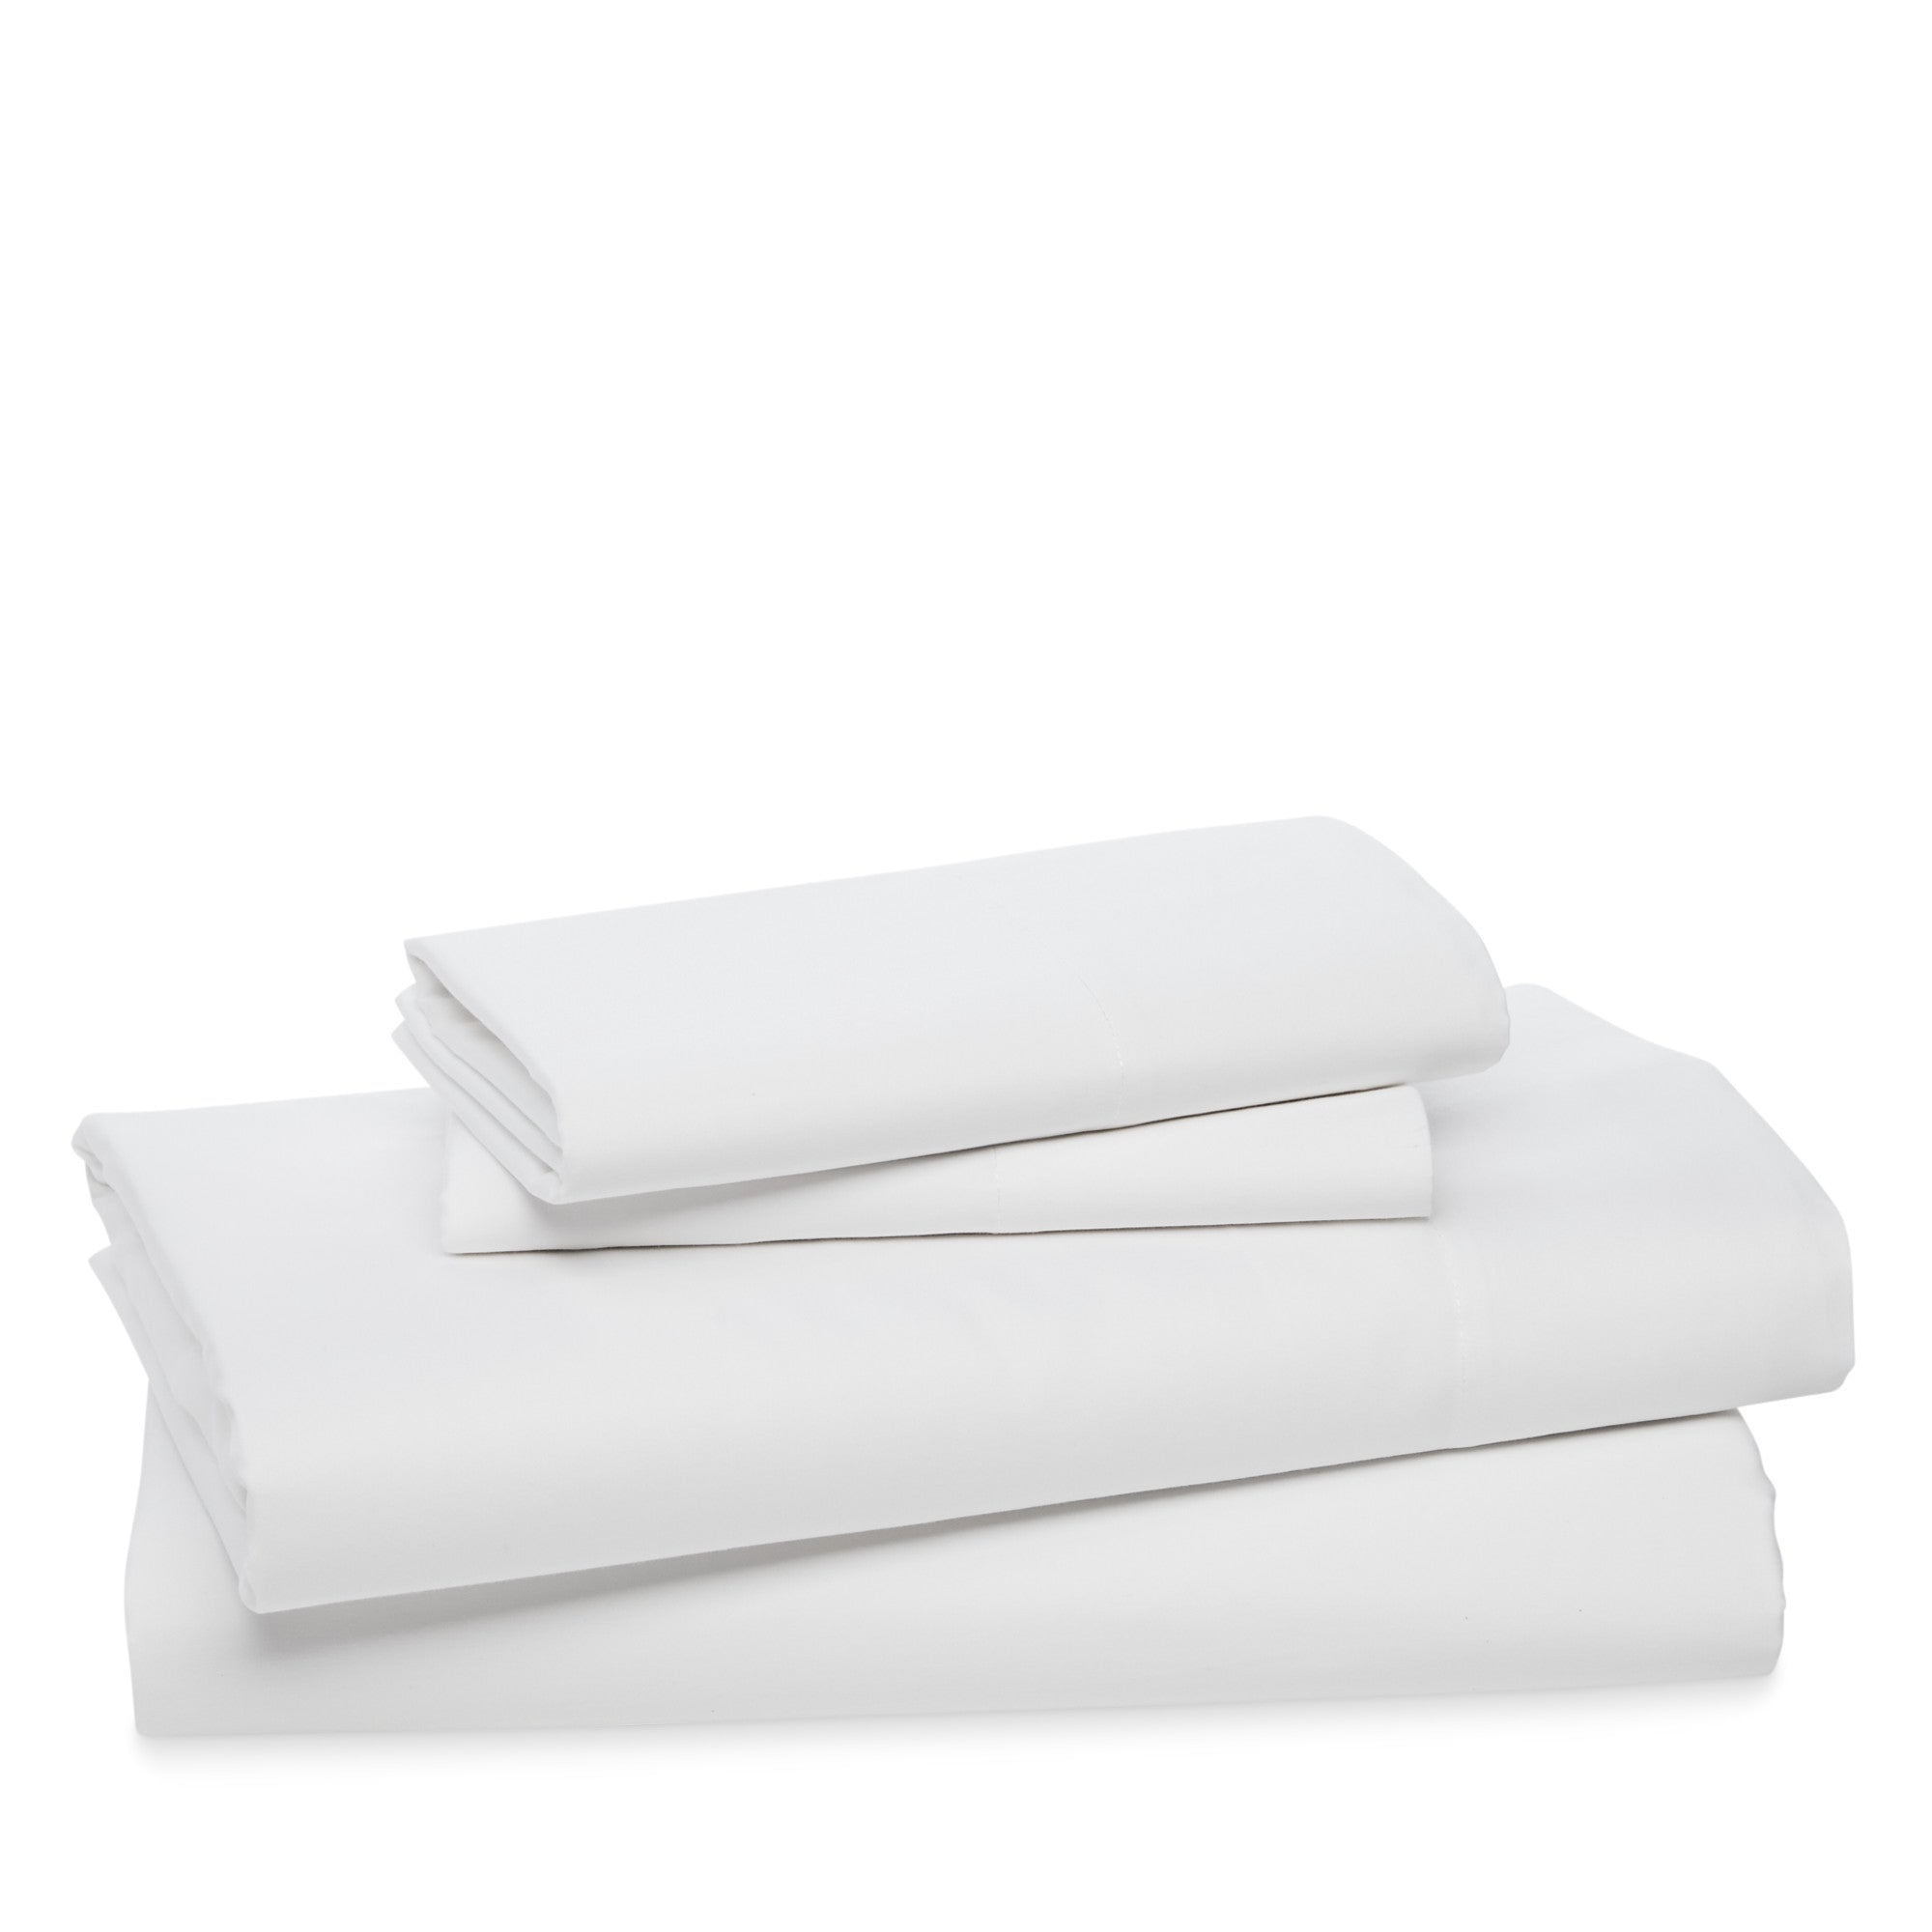 100% Washed Organic Cotton Bed Sheet Collection-Special Buy Offer